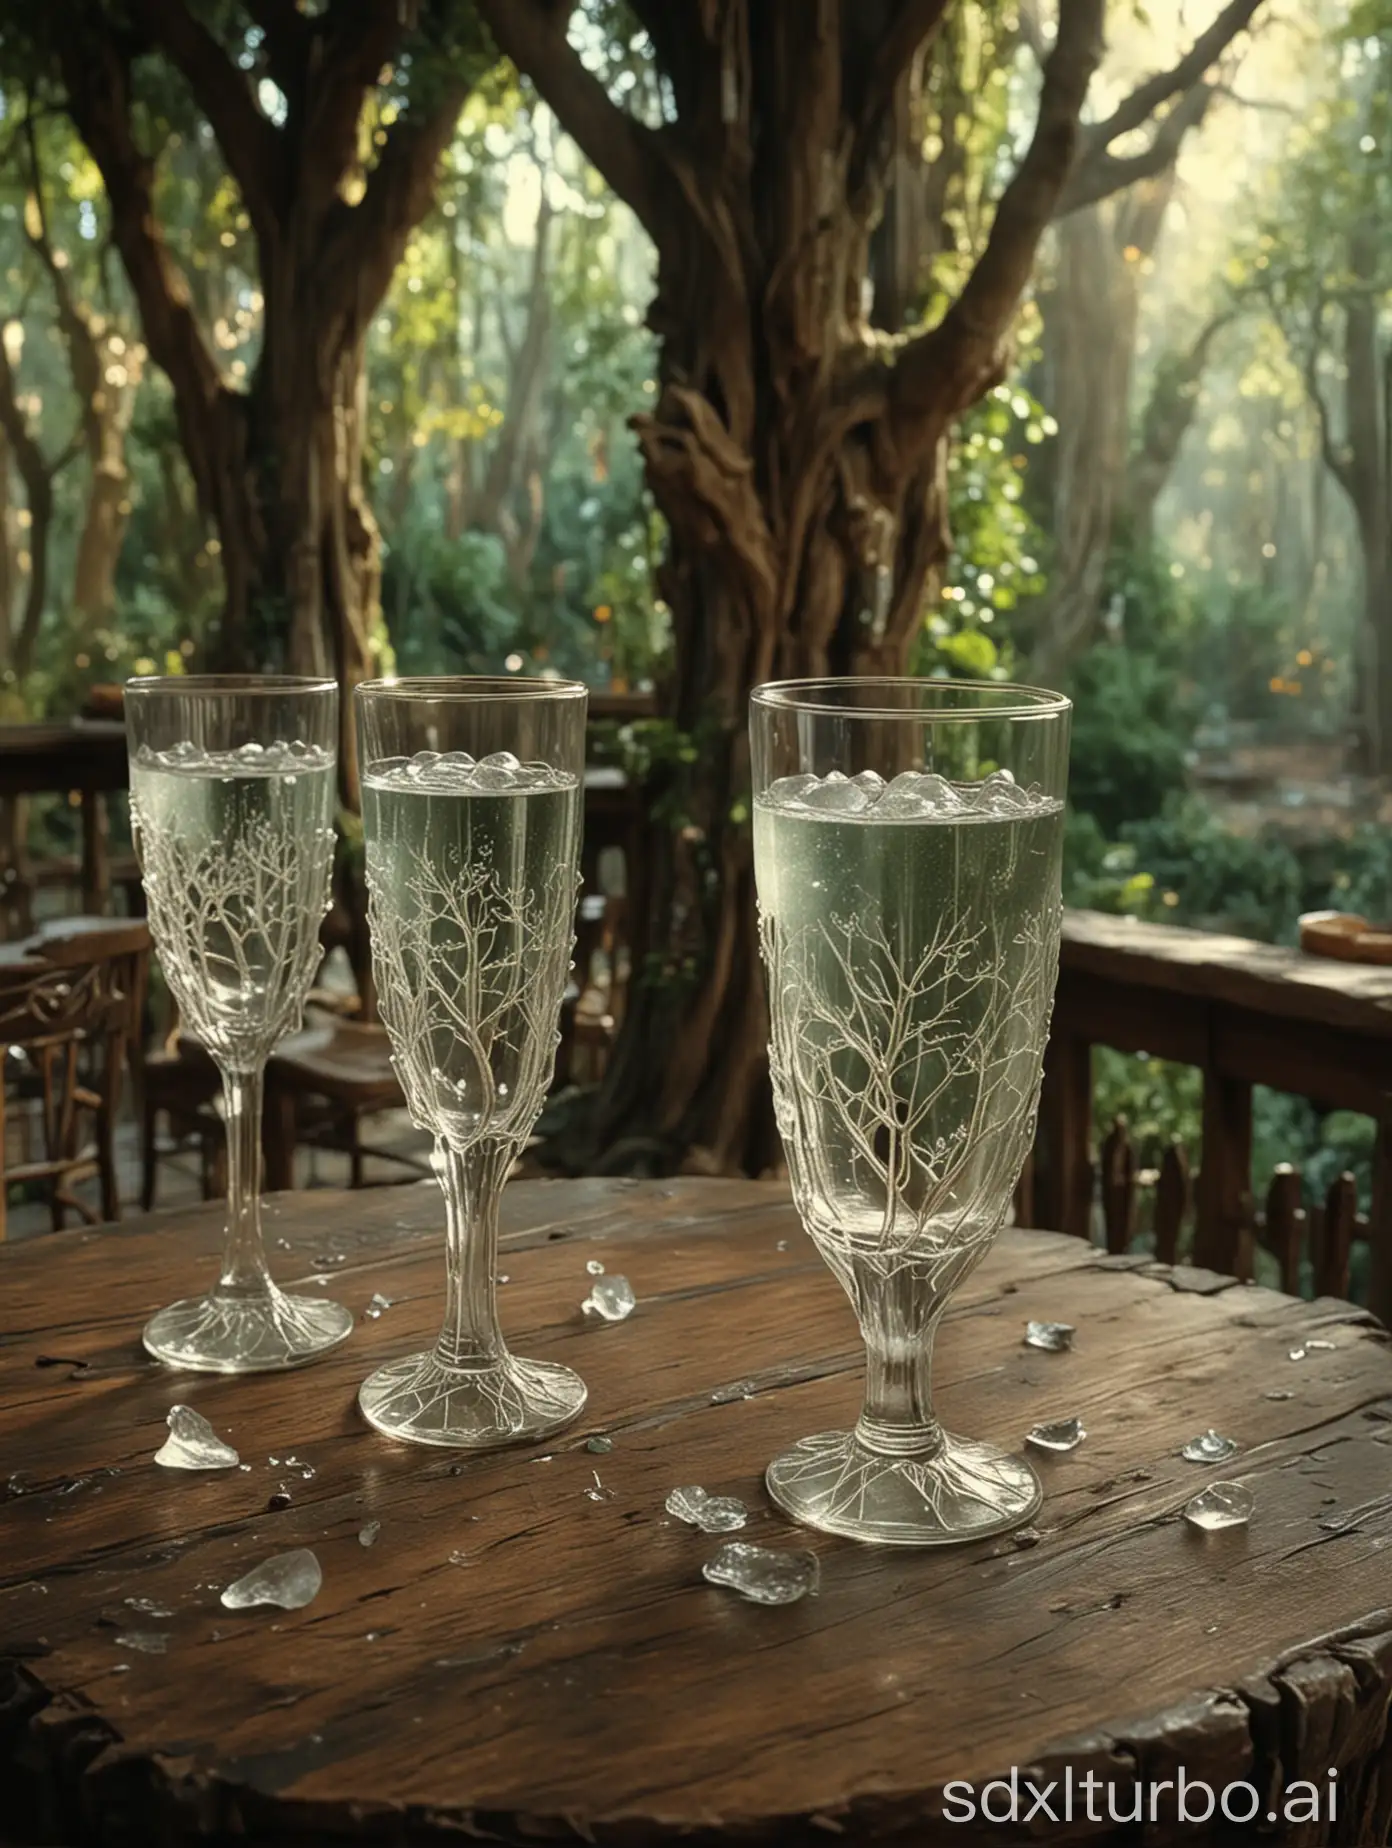 Enchanting-Table-in-Elven-Tree-House-Glass-Glasses-with-Cold-Drinks-and-Dreamy-Magic